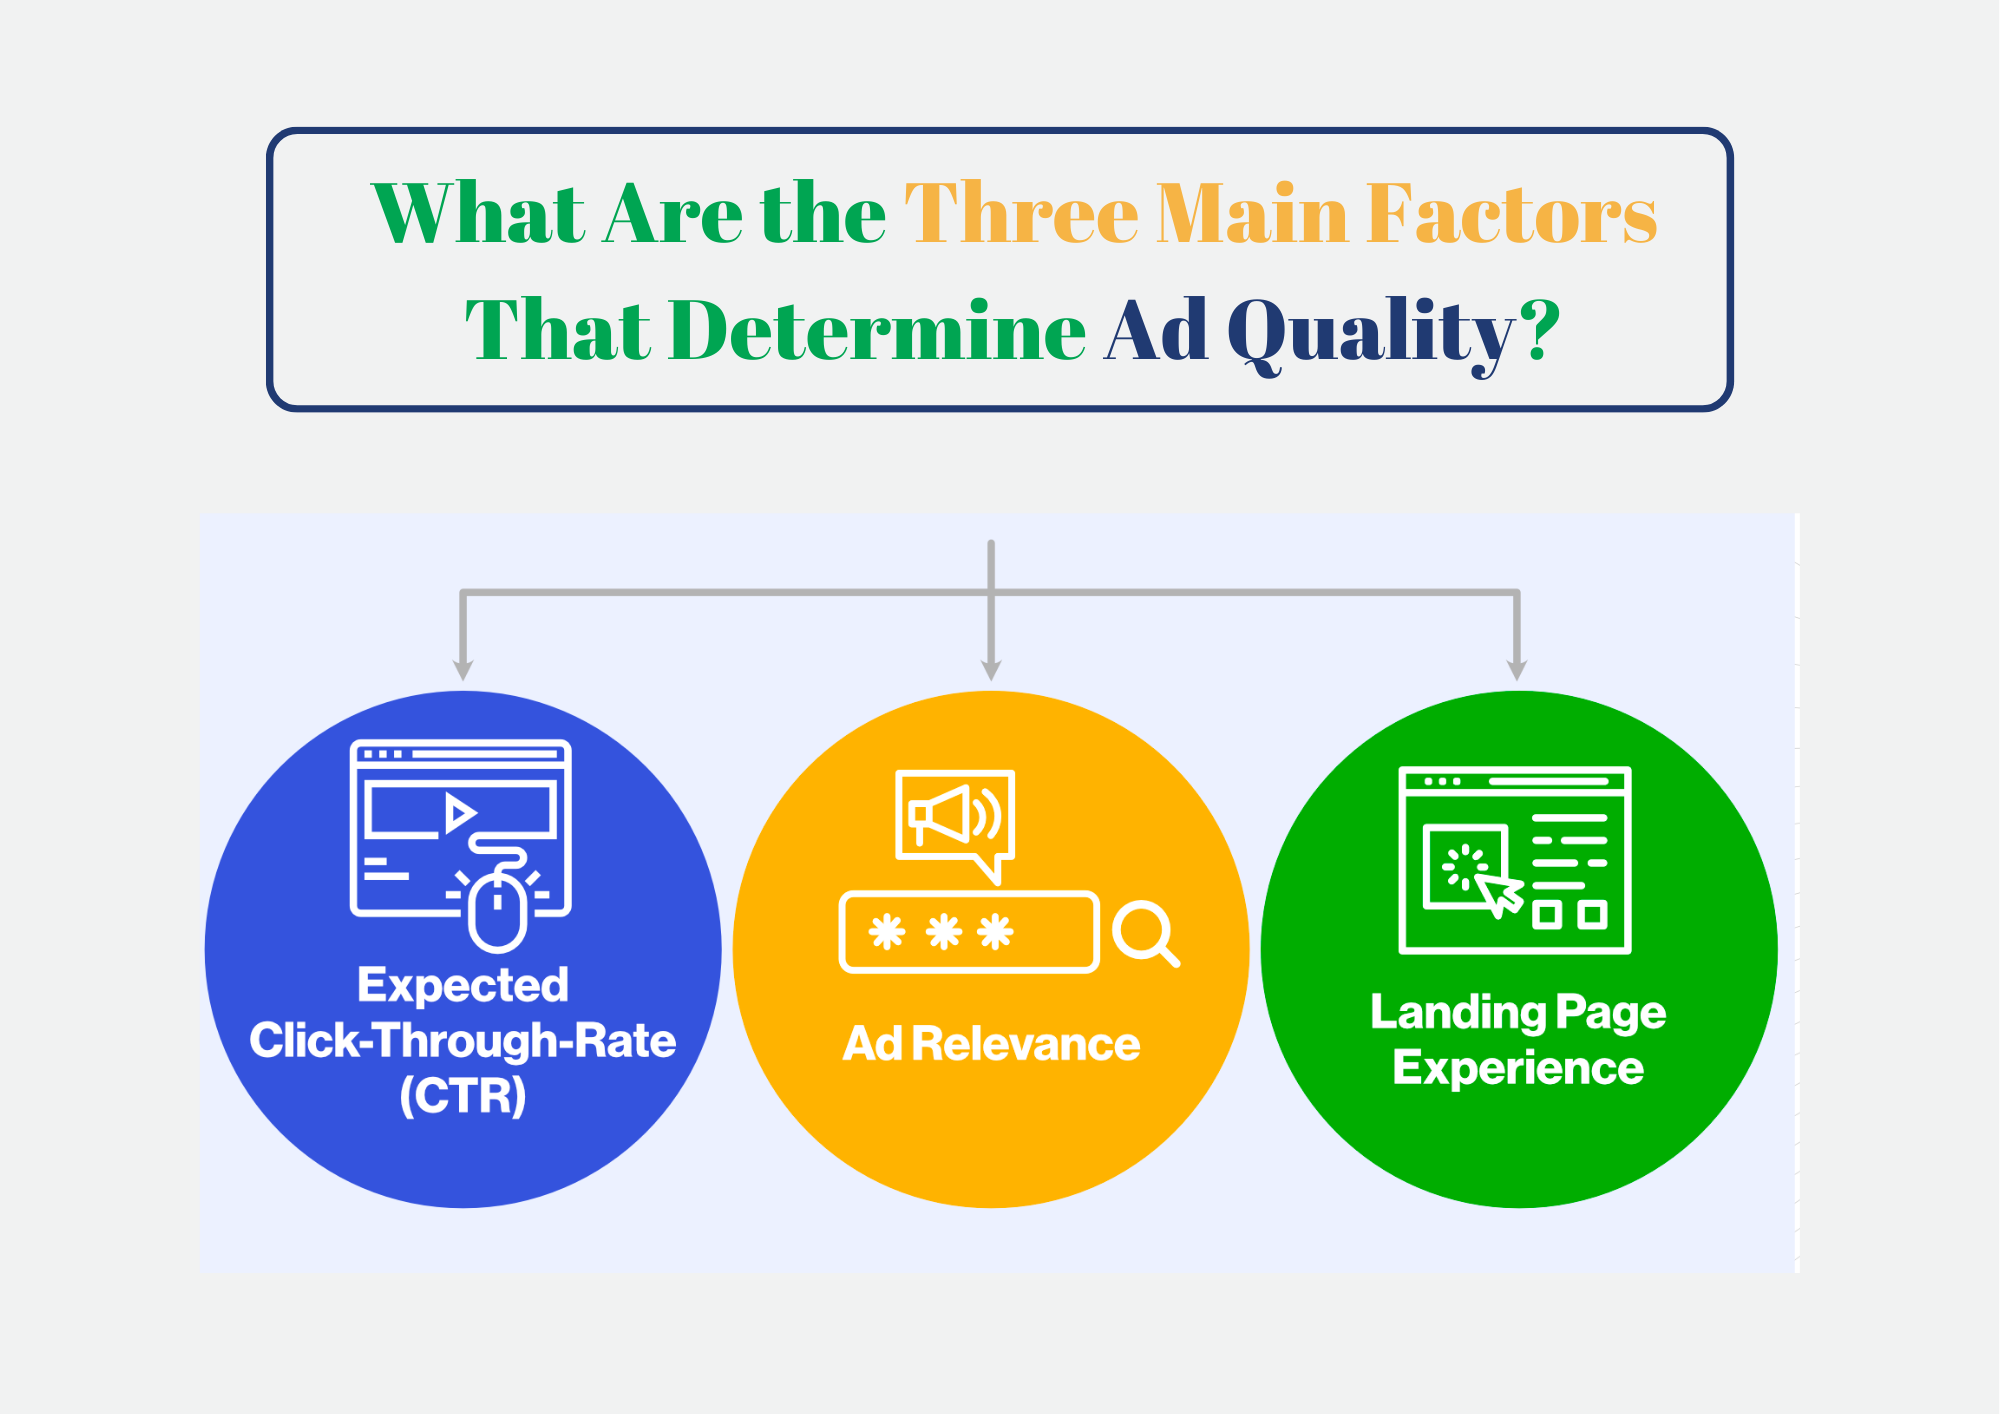 What Are the Three Main Factors That Determine Ad Quality